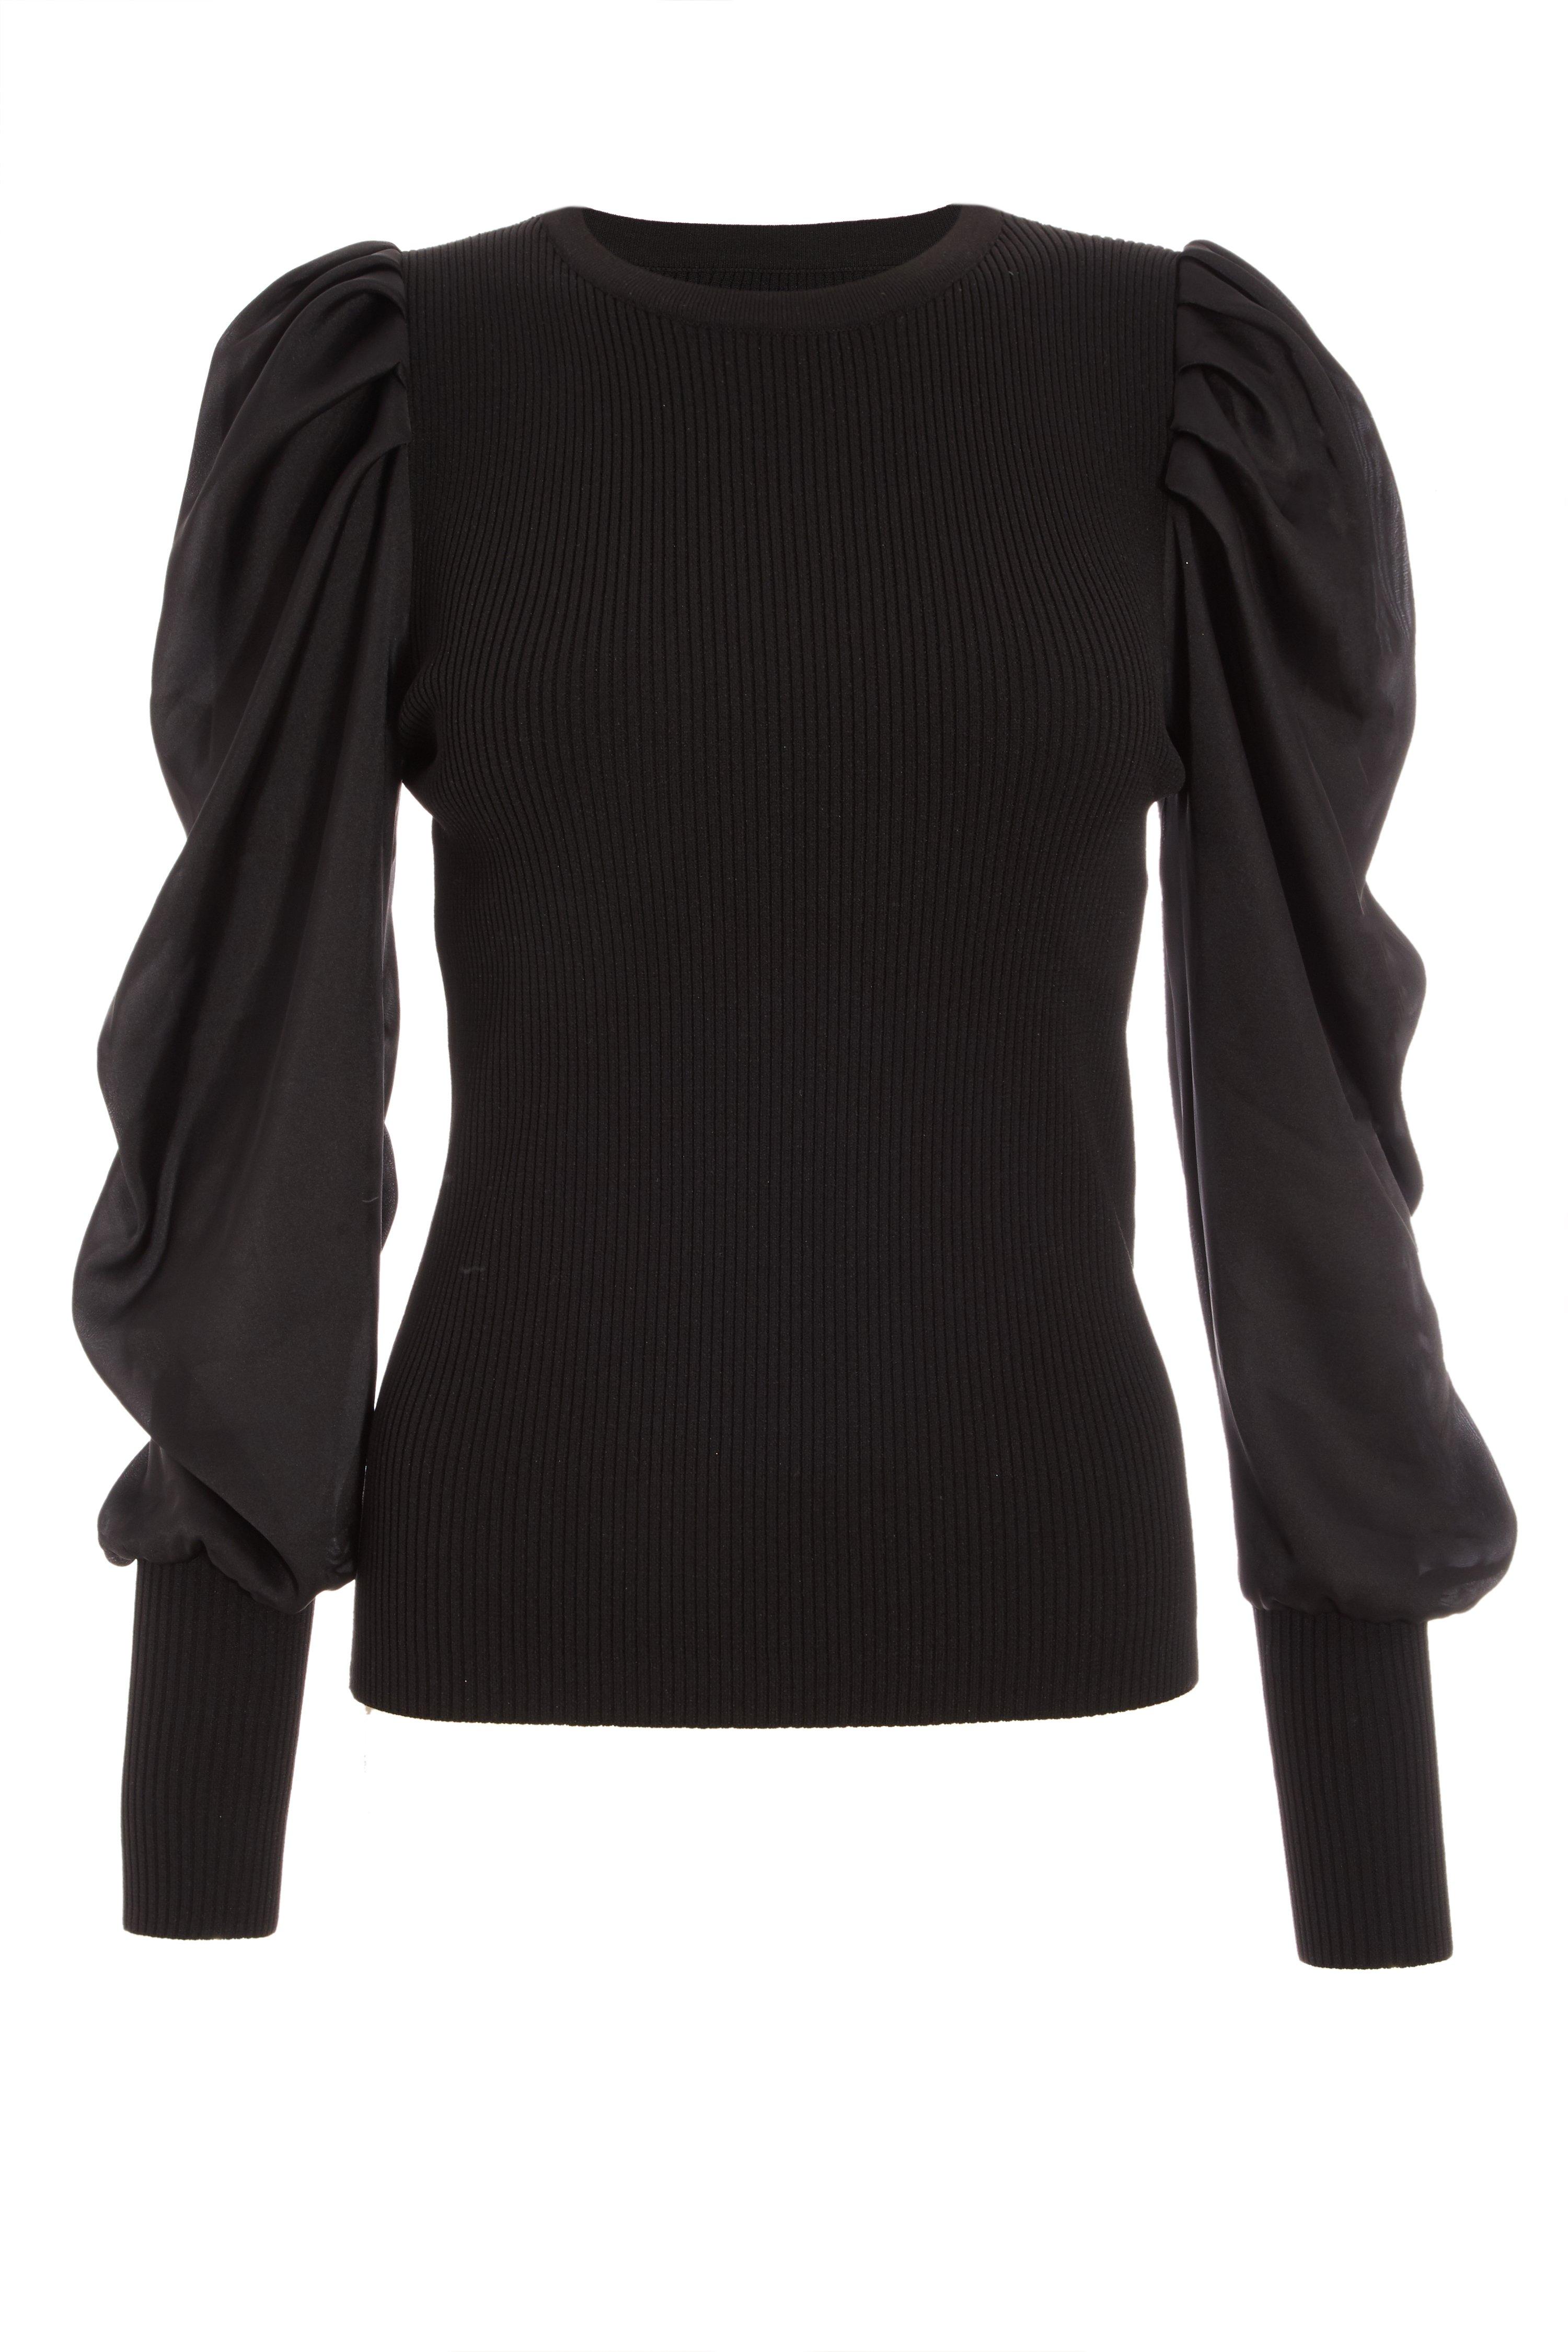 Black Knitted Satin Puff Sleeve Jumper - Quiz Clothing